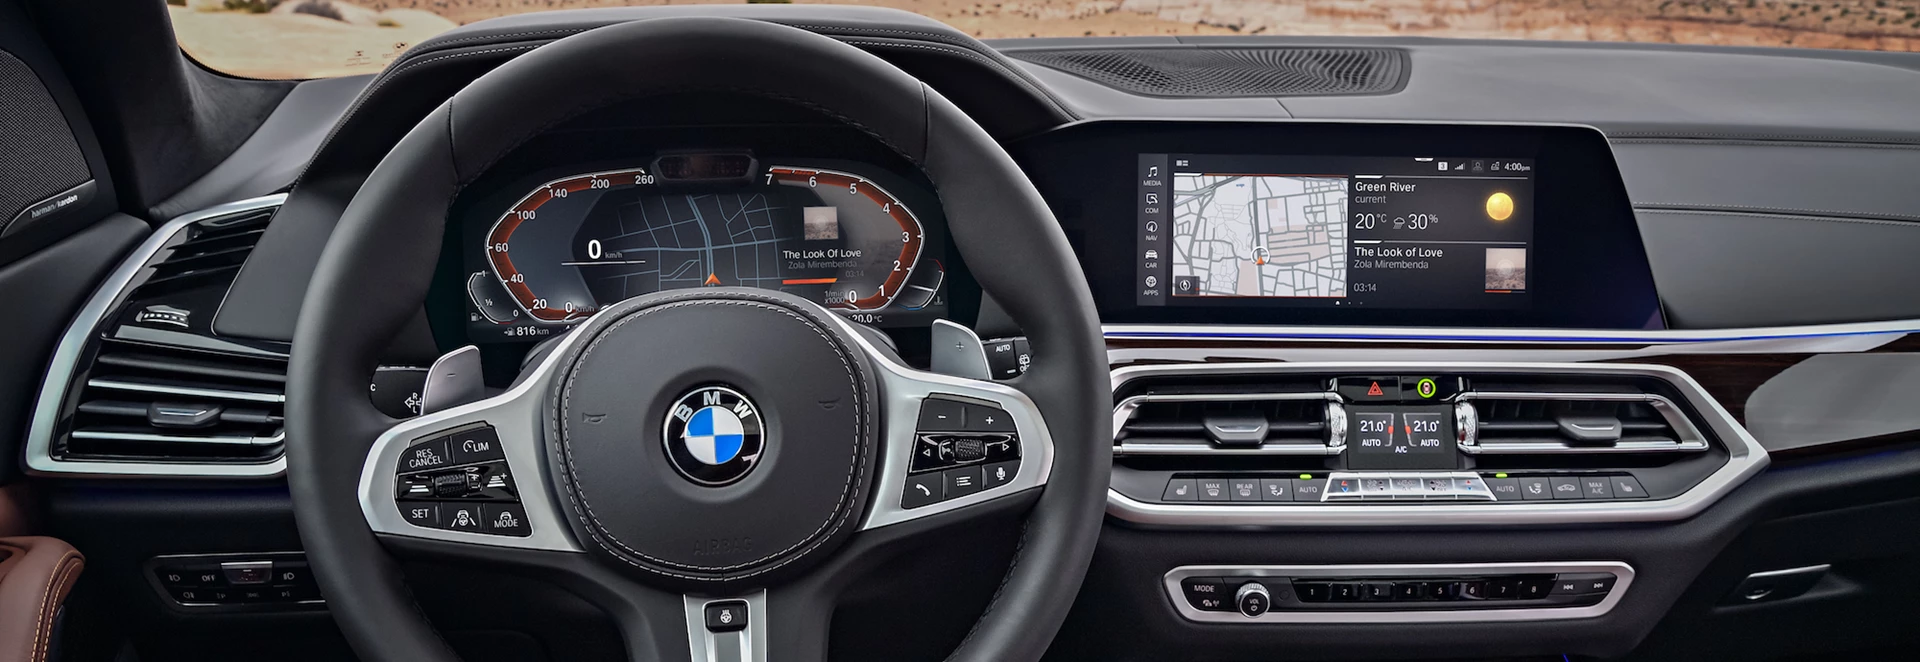 BMW replaces iDrive system with new Cockpit system